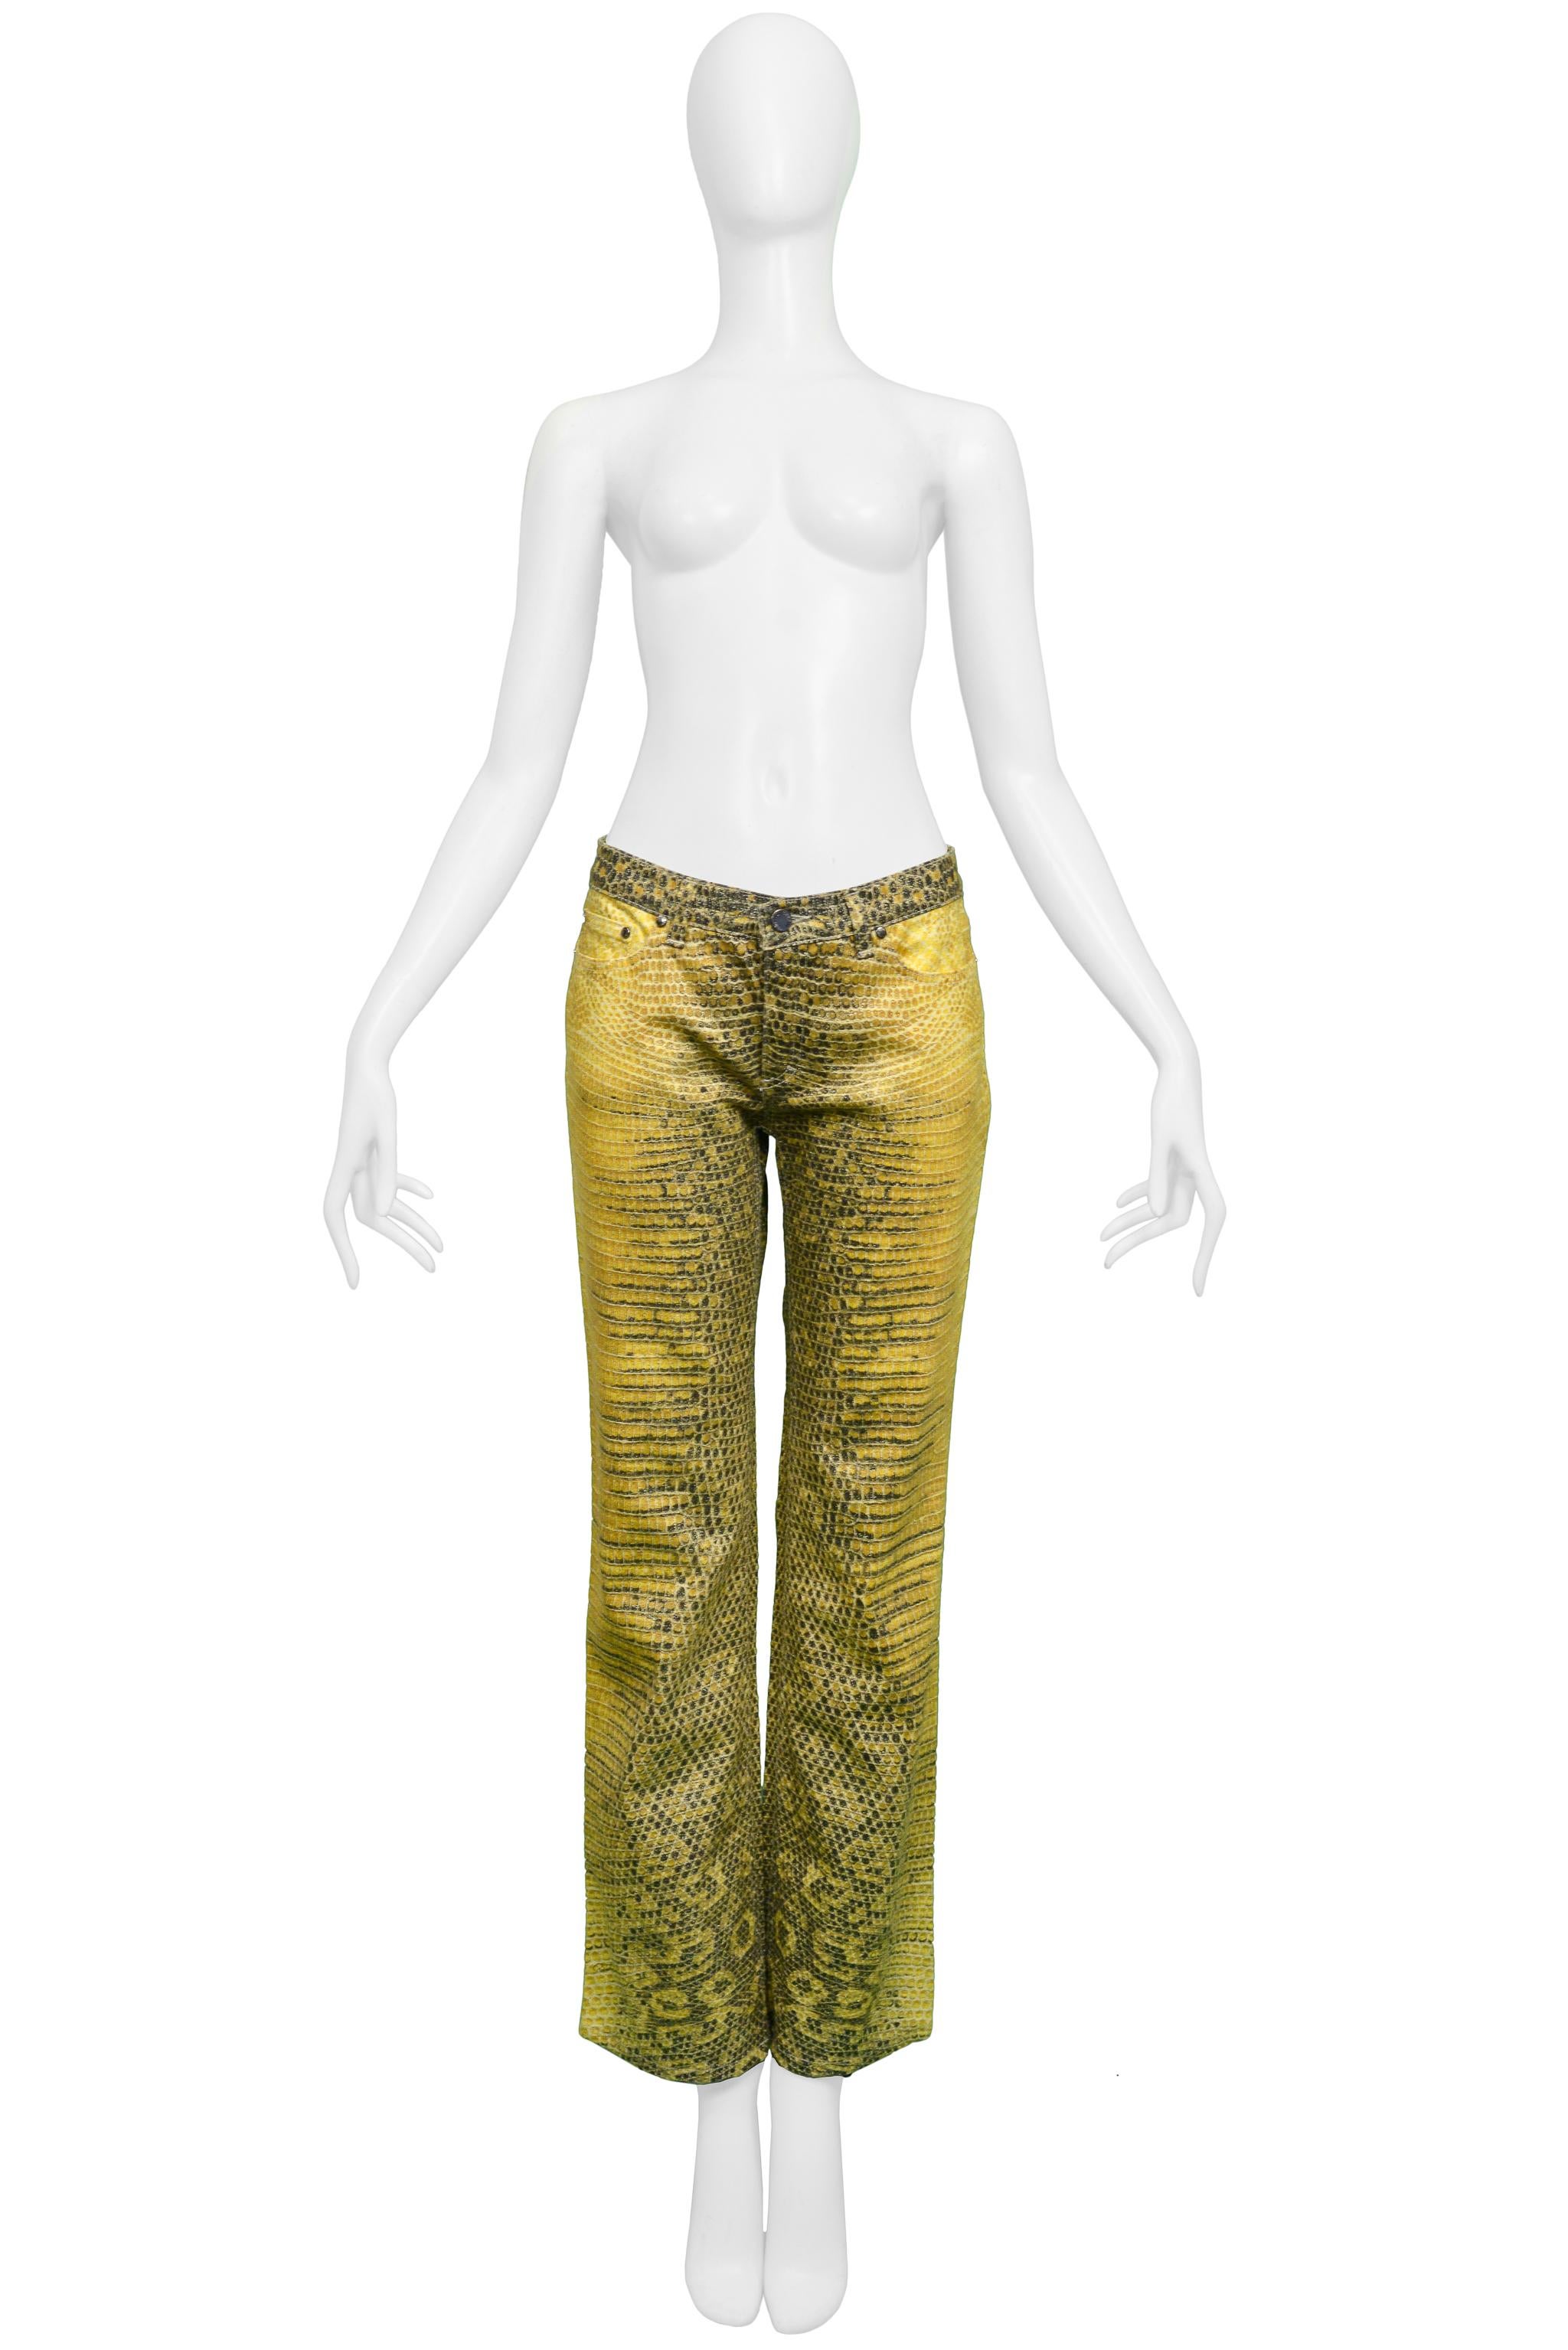 Resurrection is pleased to offer a pair of vintage Roberto Cavalli yellow denim high-waisted pants with all-over python snake print with center-front zipper with gold-tone hardware, and straight leg cut.

Size Small
Cotton Denim 
Made in